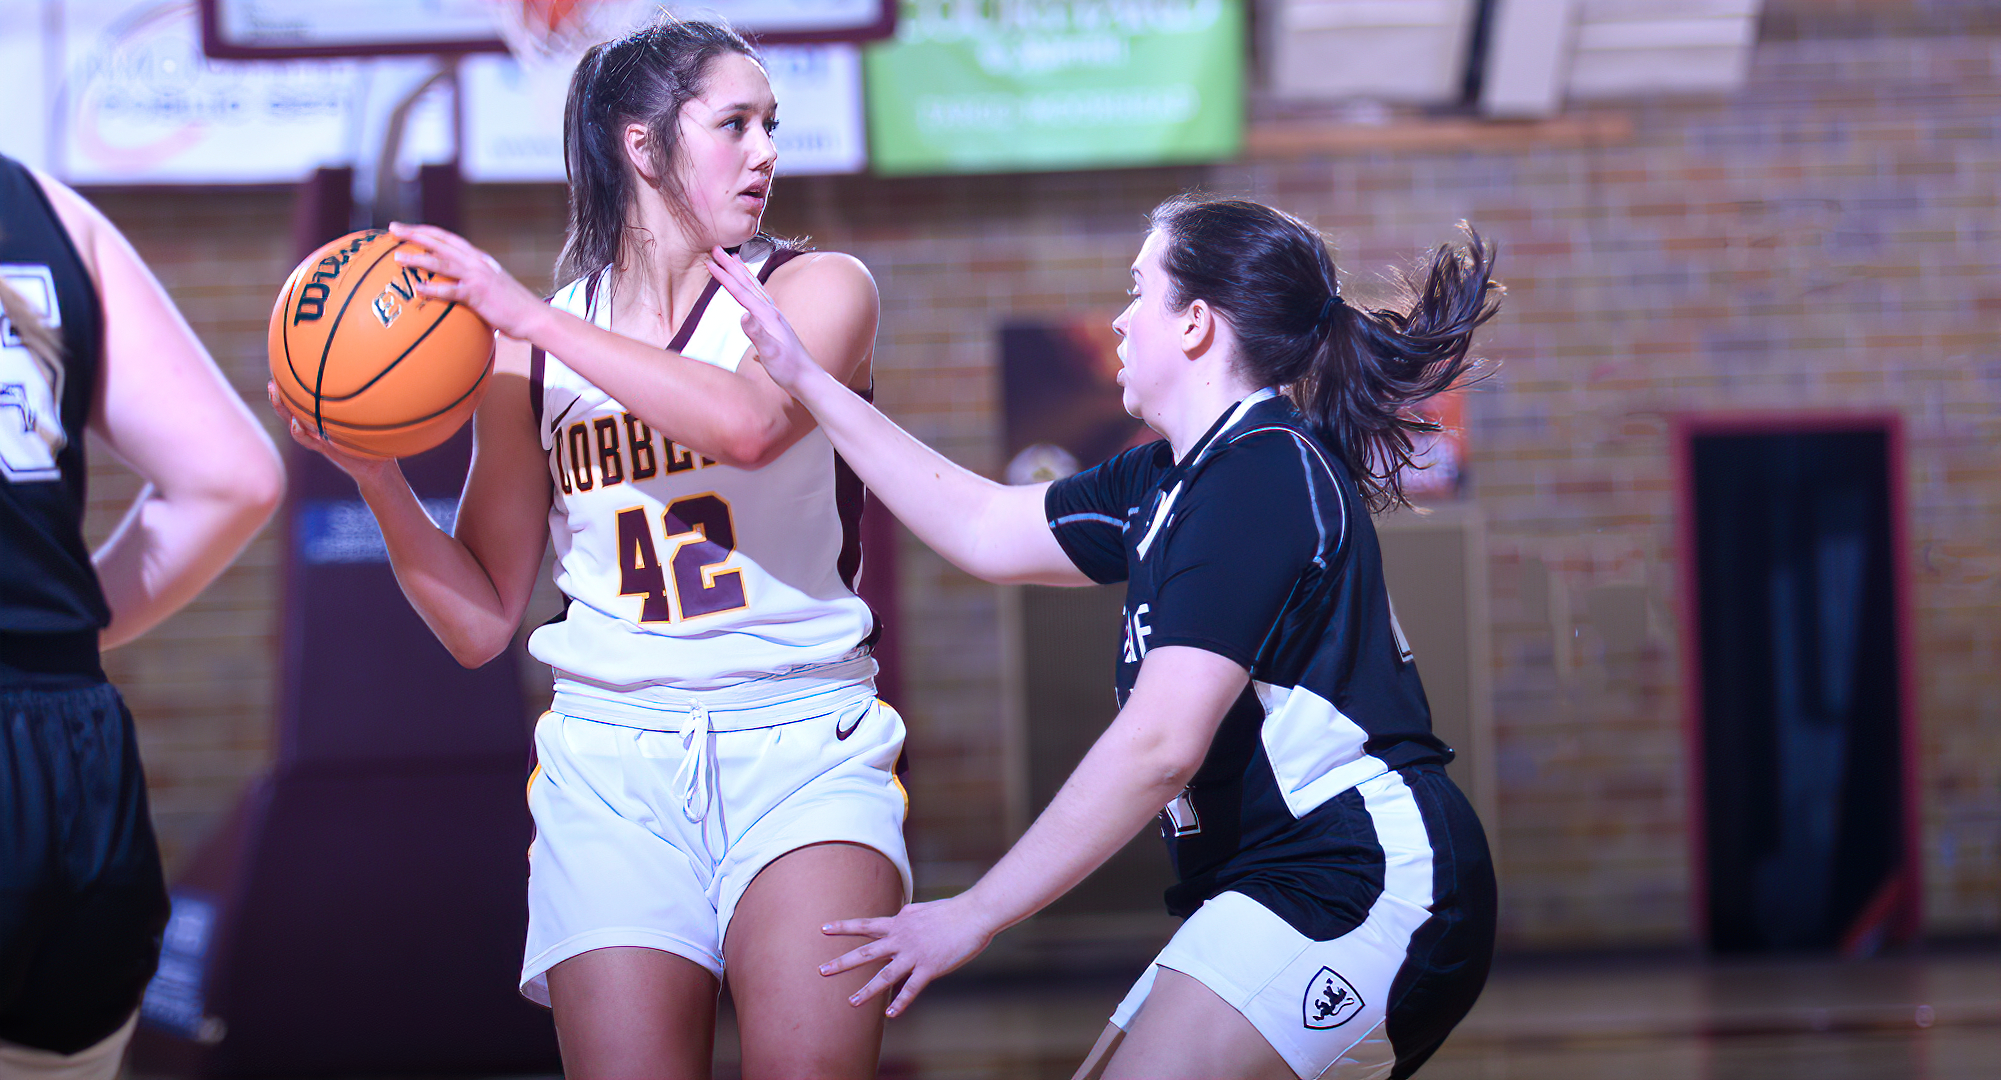 Freshman Makayla Anderson scored 13 points and grabbed 11 rebounds to record her first college double-double in the Cobbers' game at St. Olaf.